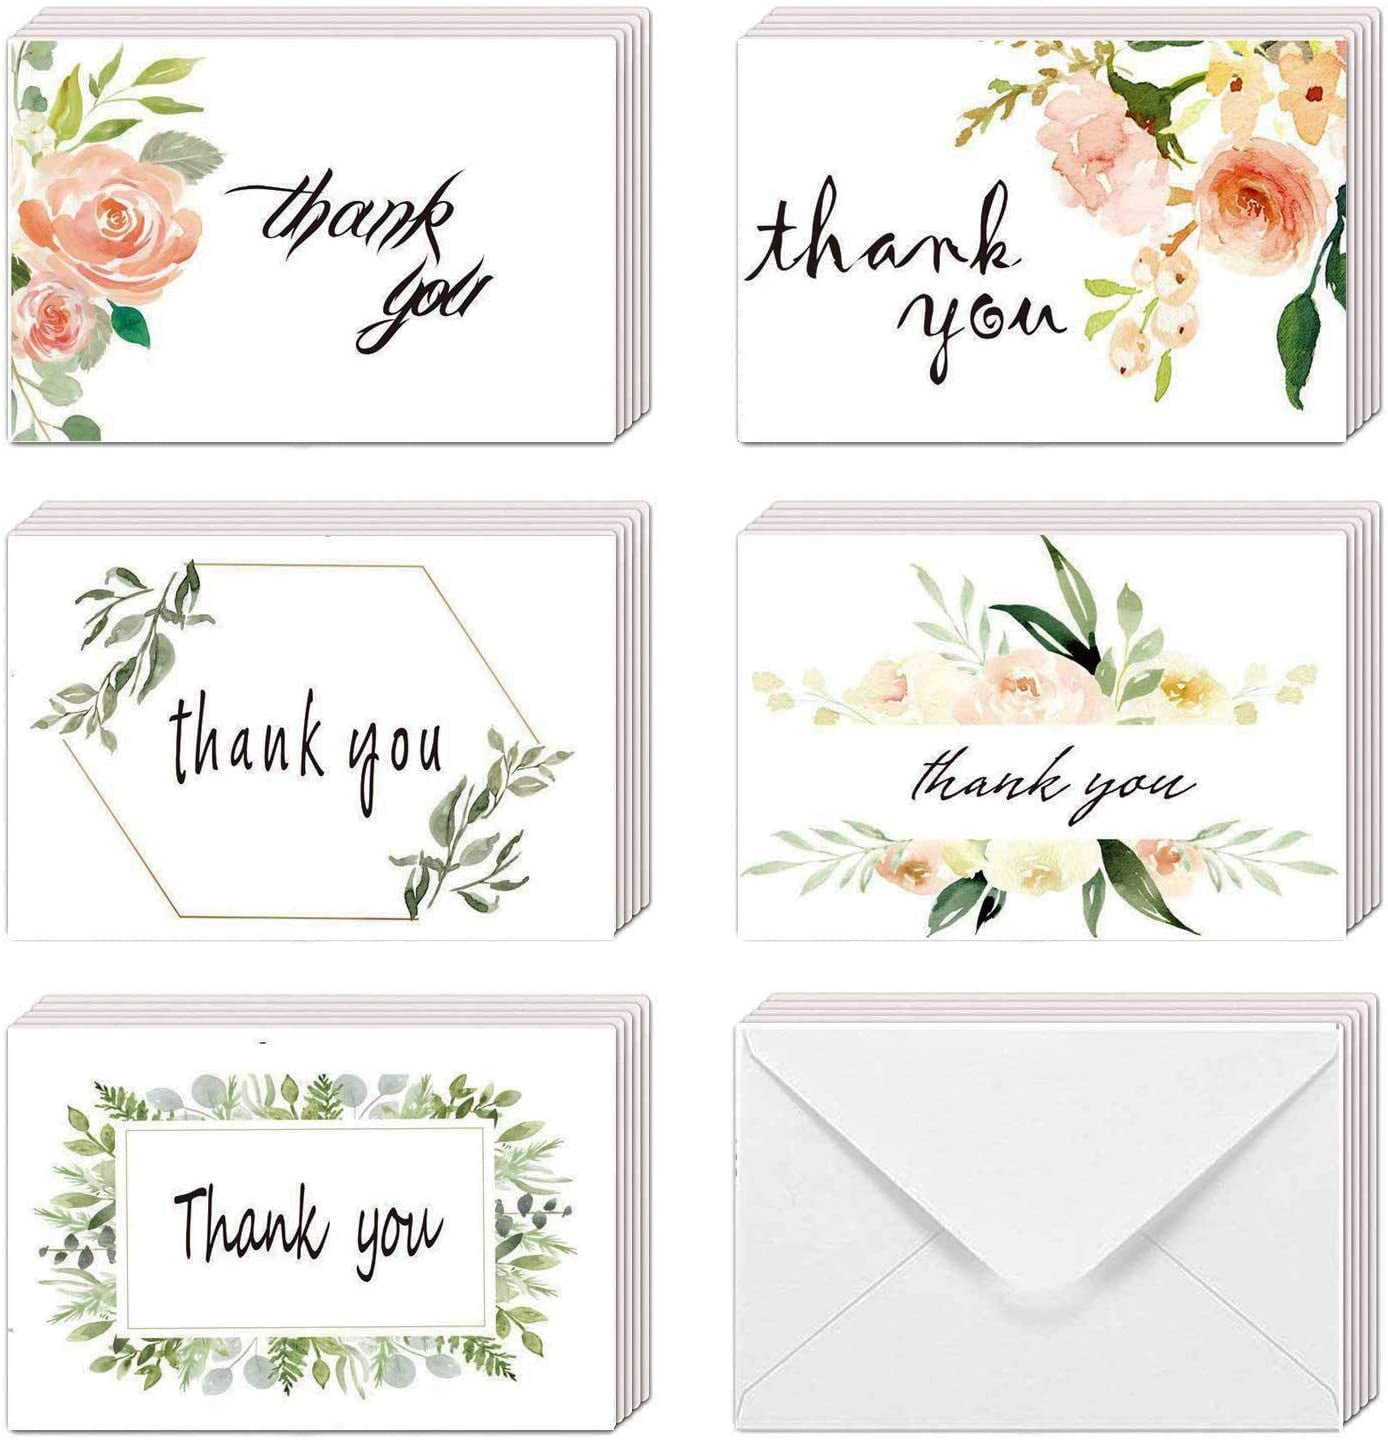 100 Thank You Cards Bulk w/Gold Foil Stickers & White Envelopes Perfect for Weddings Graduation 4x6 Blank Note Cards Bridal Showers and Baby Showers